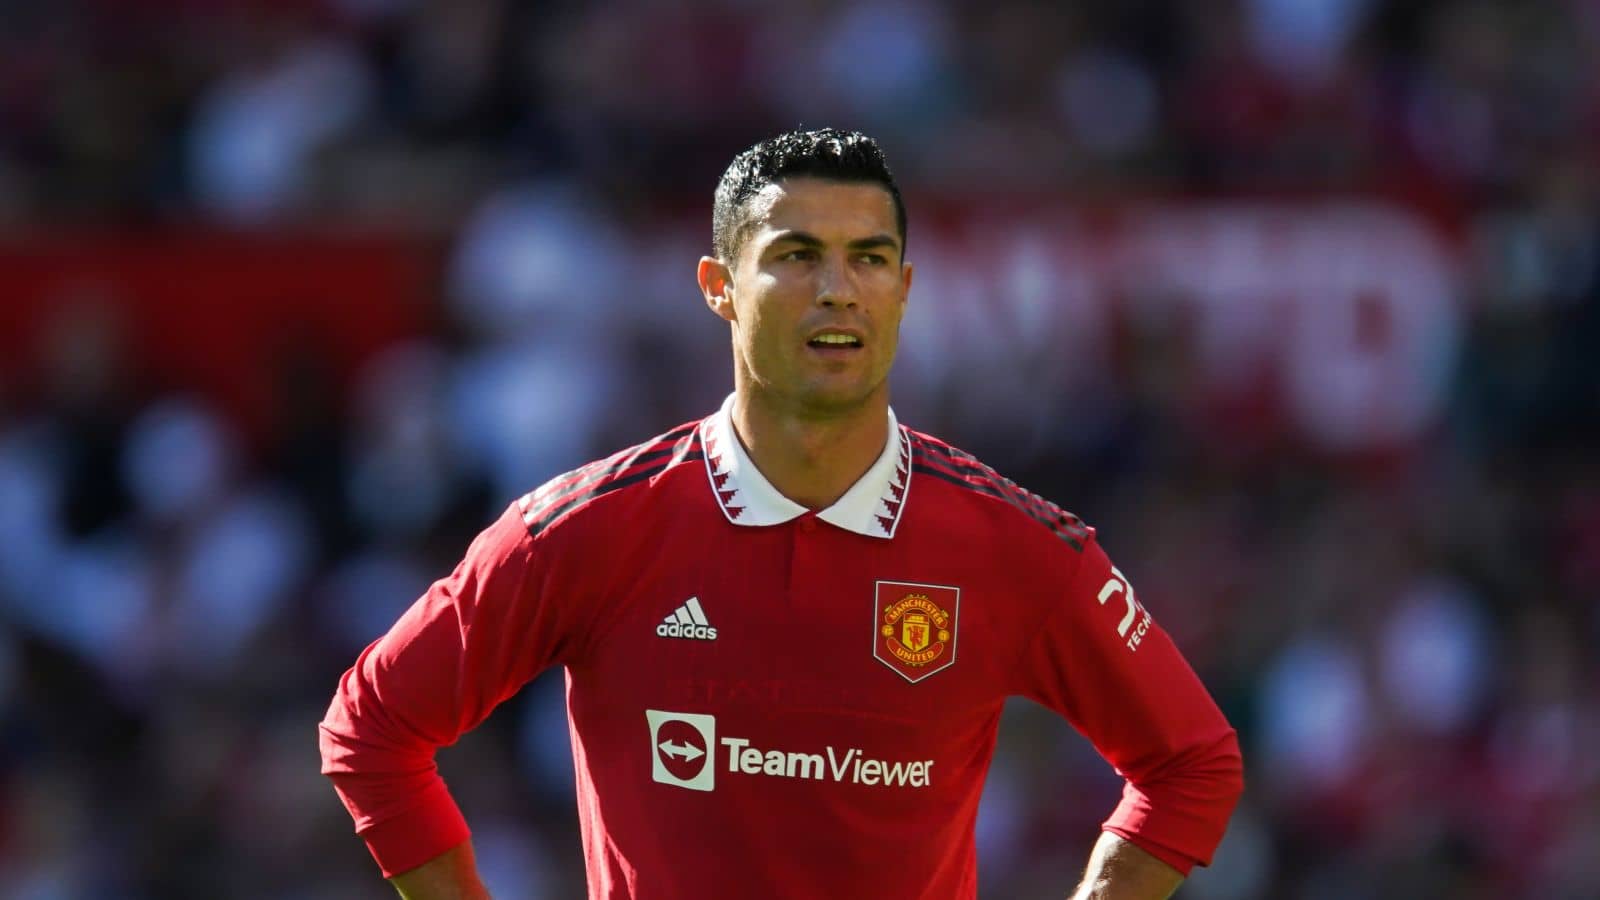 Early exit casts further doubt on Ronaldo future but Man Utd superstar declares himself happy to play